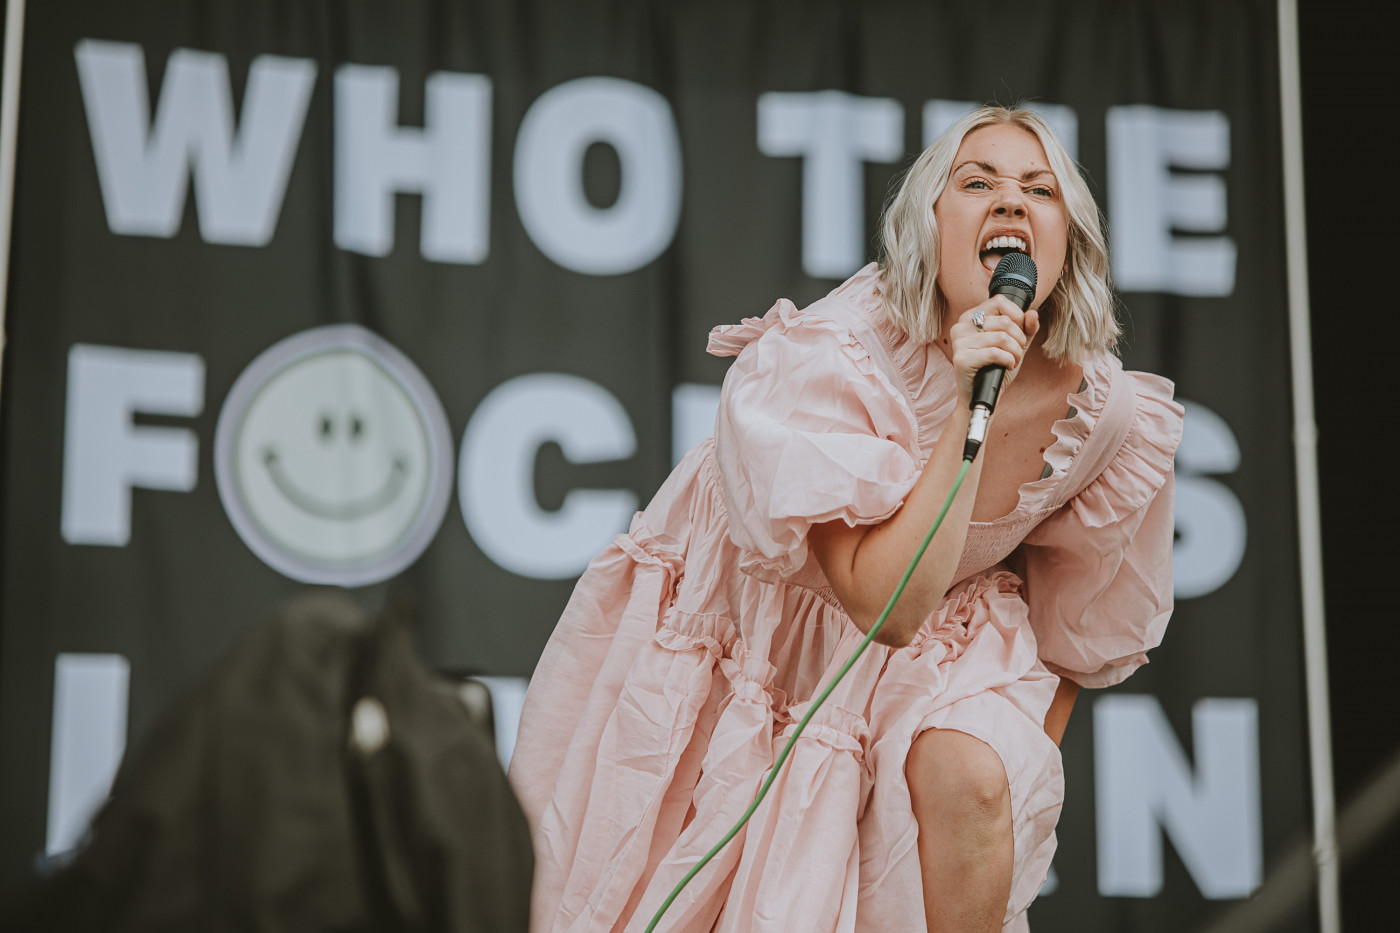 Lauran Hibbard channelled Courtney Love's infamous Glastonbury look at Tramlines 2021